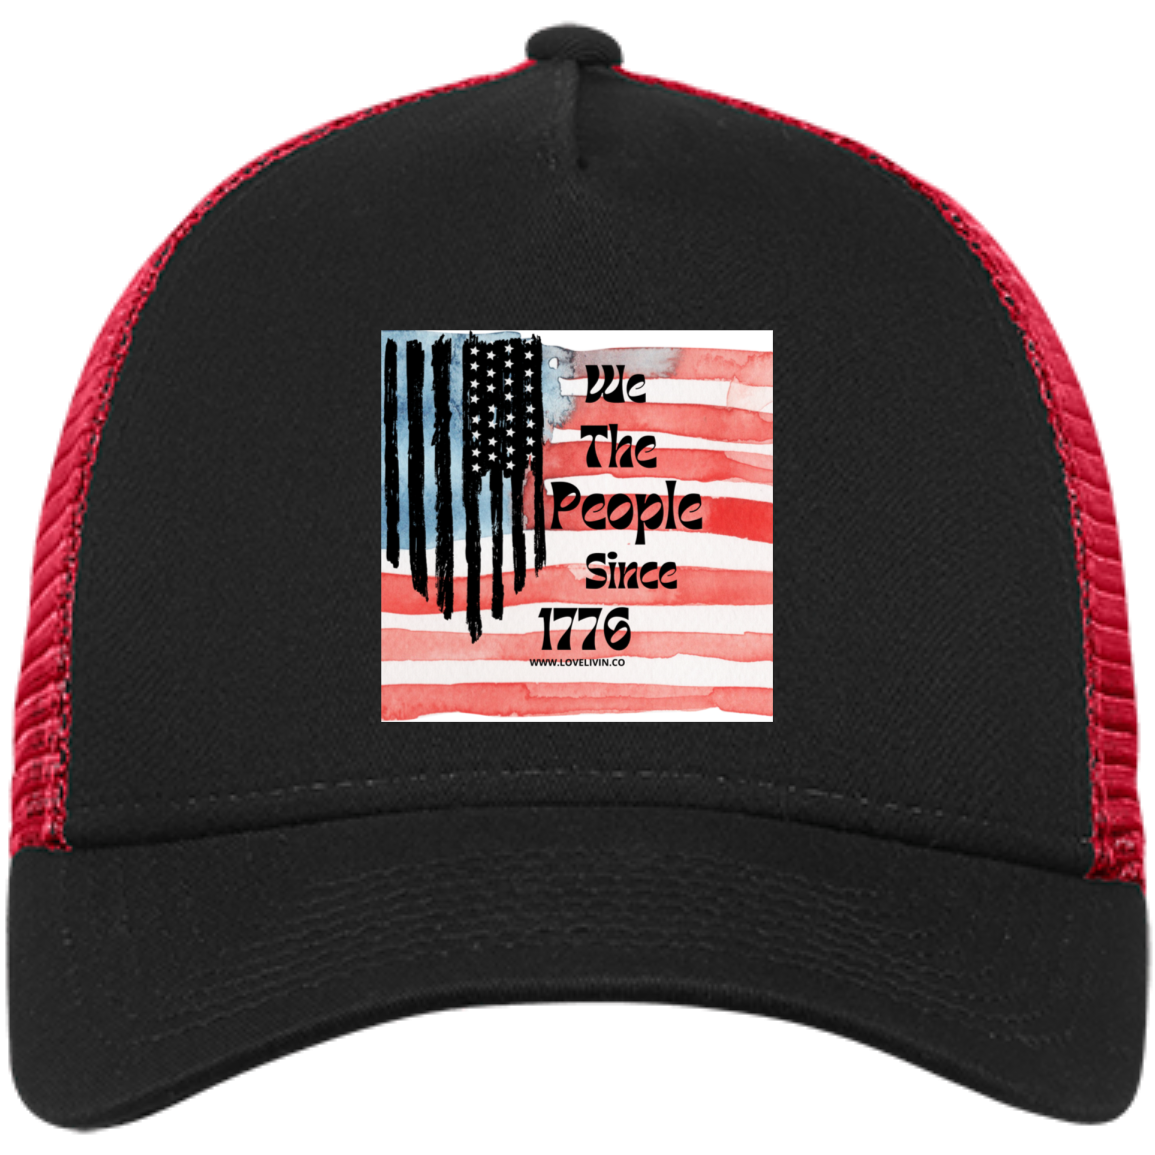 WE THE PEOPLE SINCE 1776-B Embroidered Snapback Trucker Cap